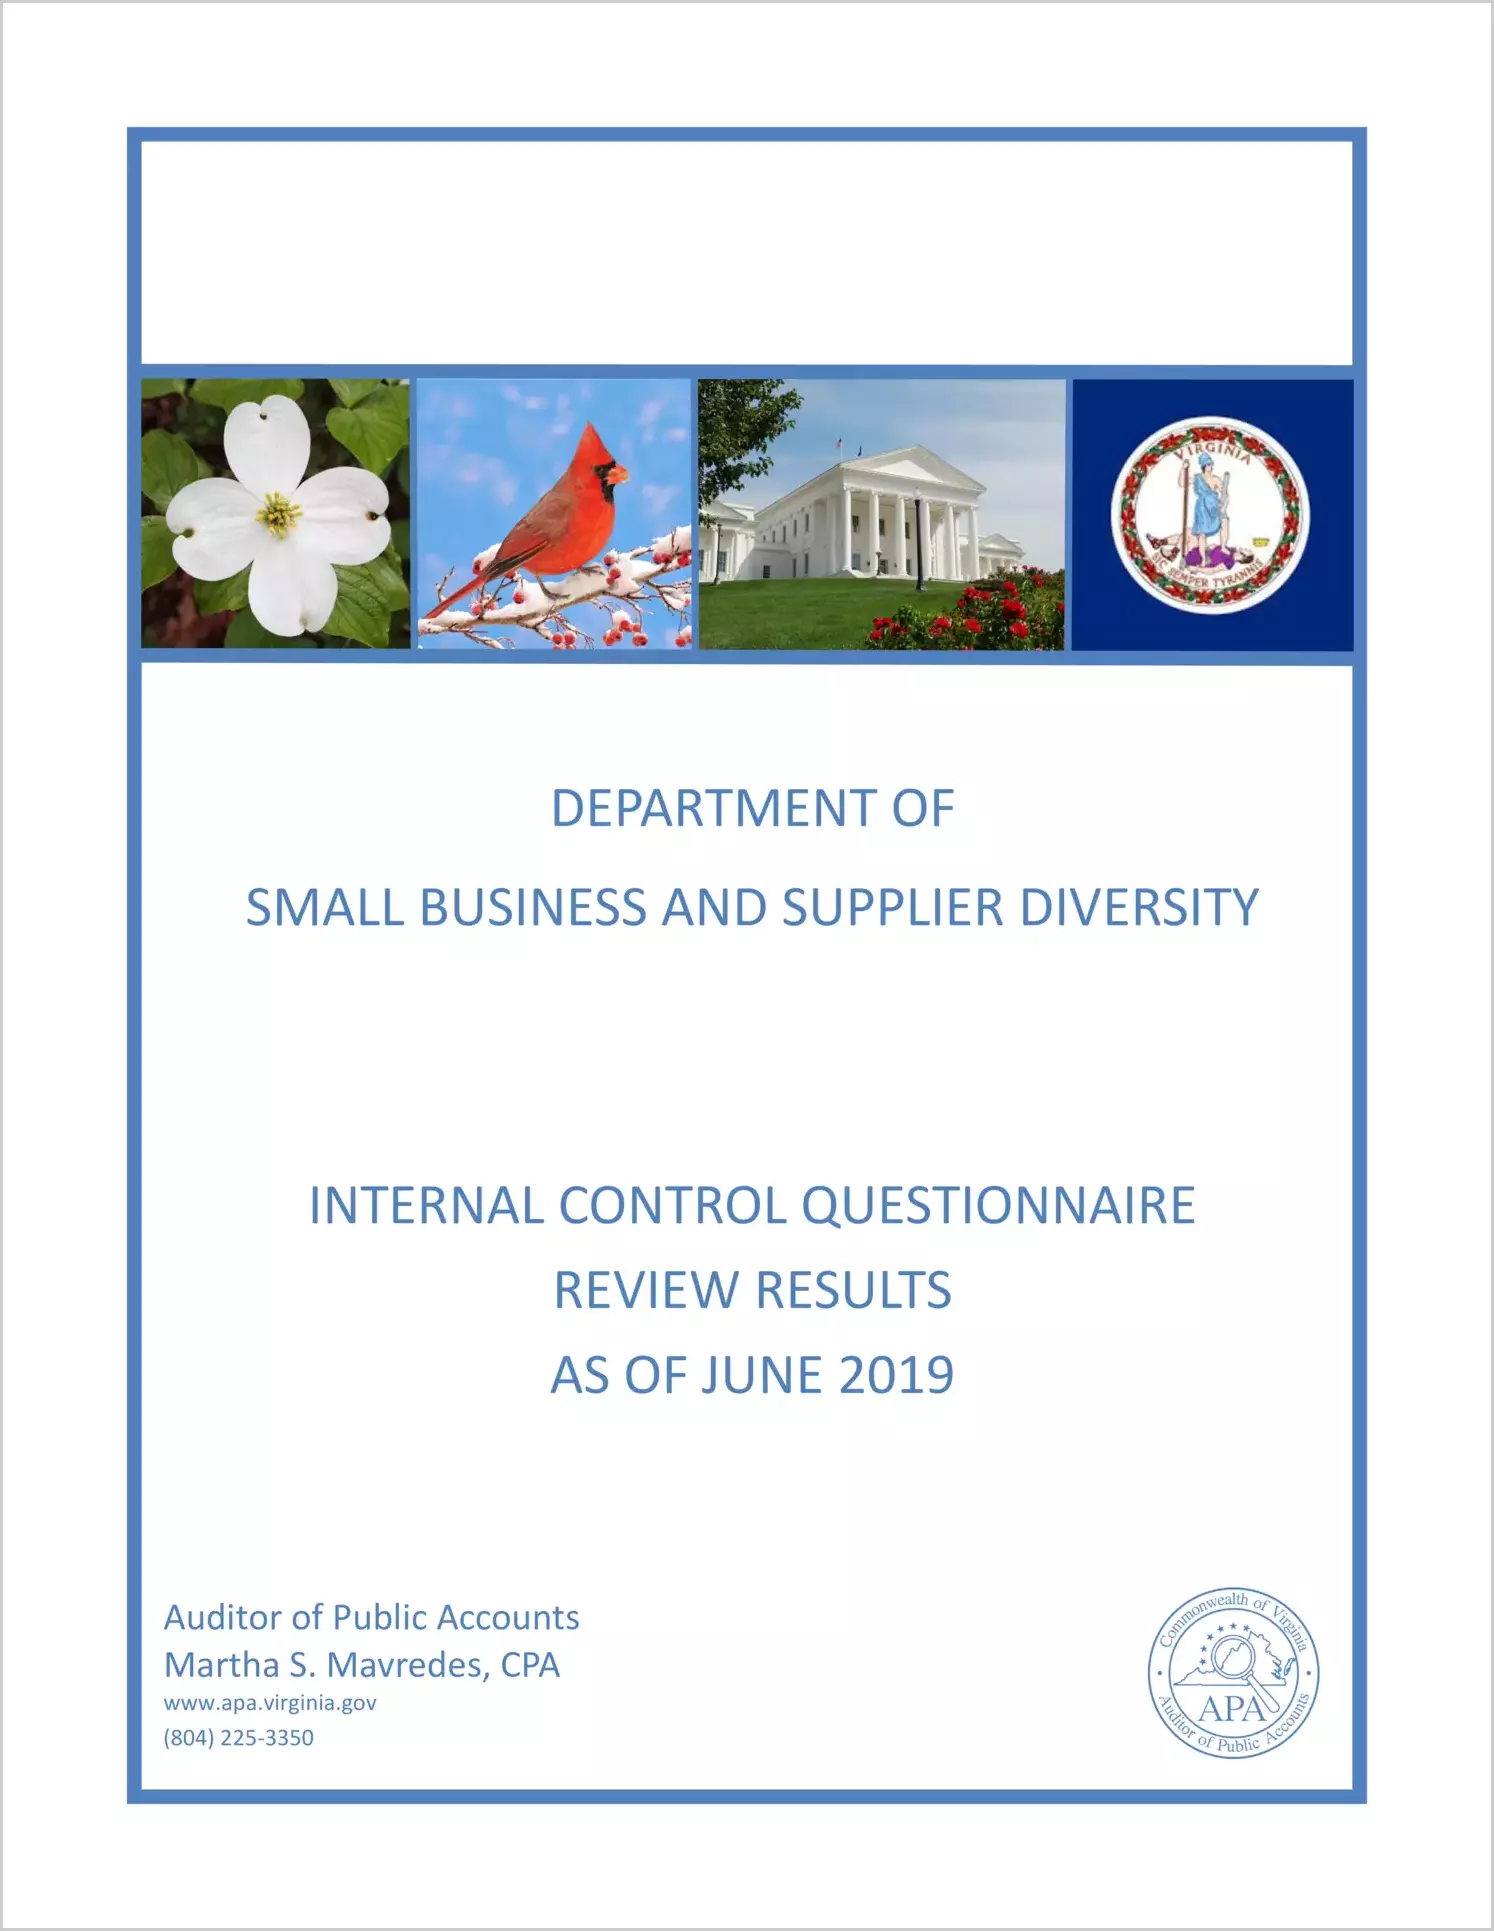 Department of Small Business and Supplier Diversity Internal Control Questionnaire Review Results as of June 2019